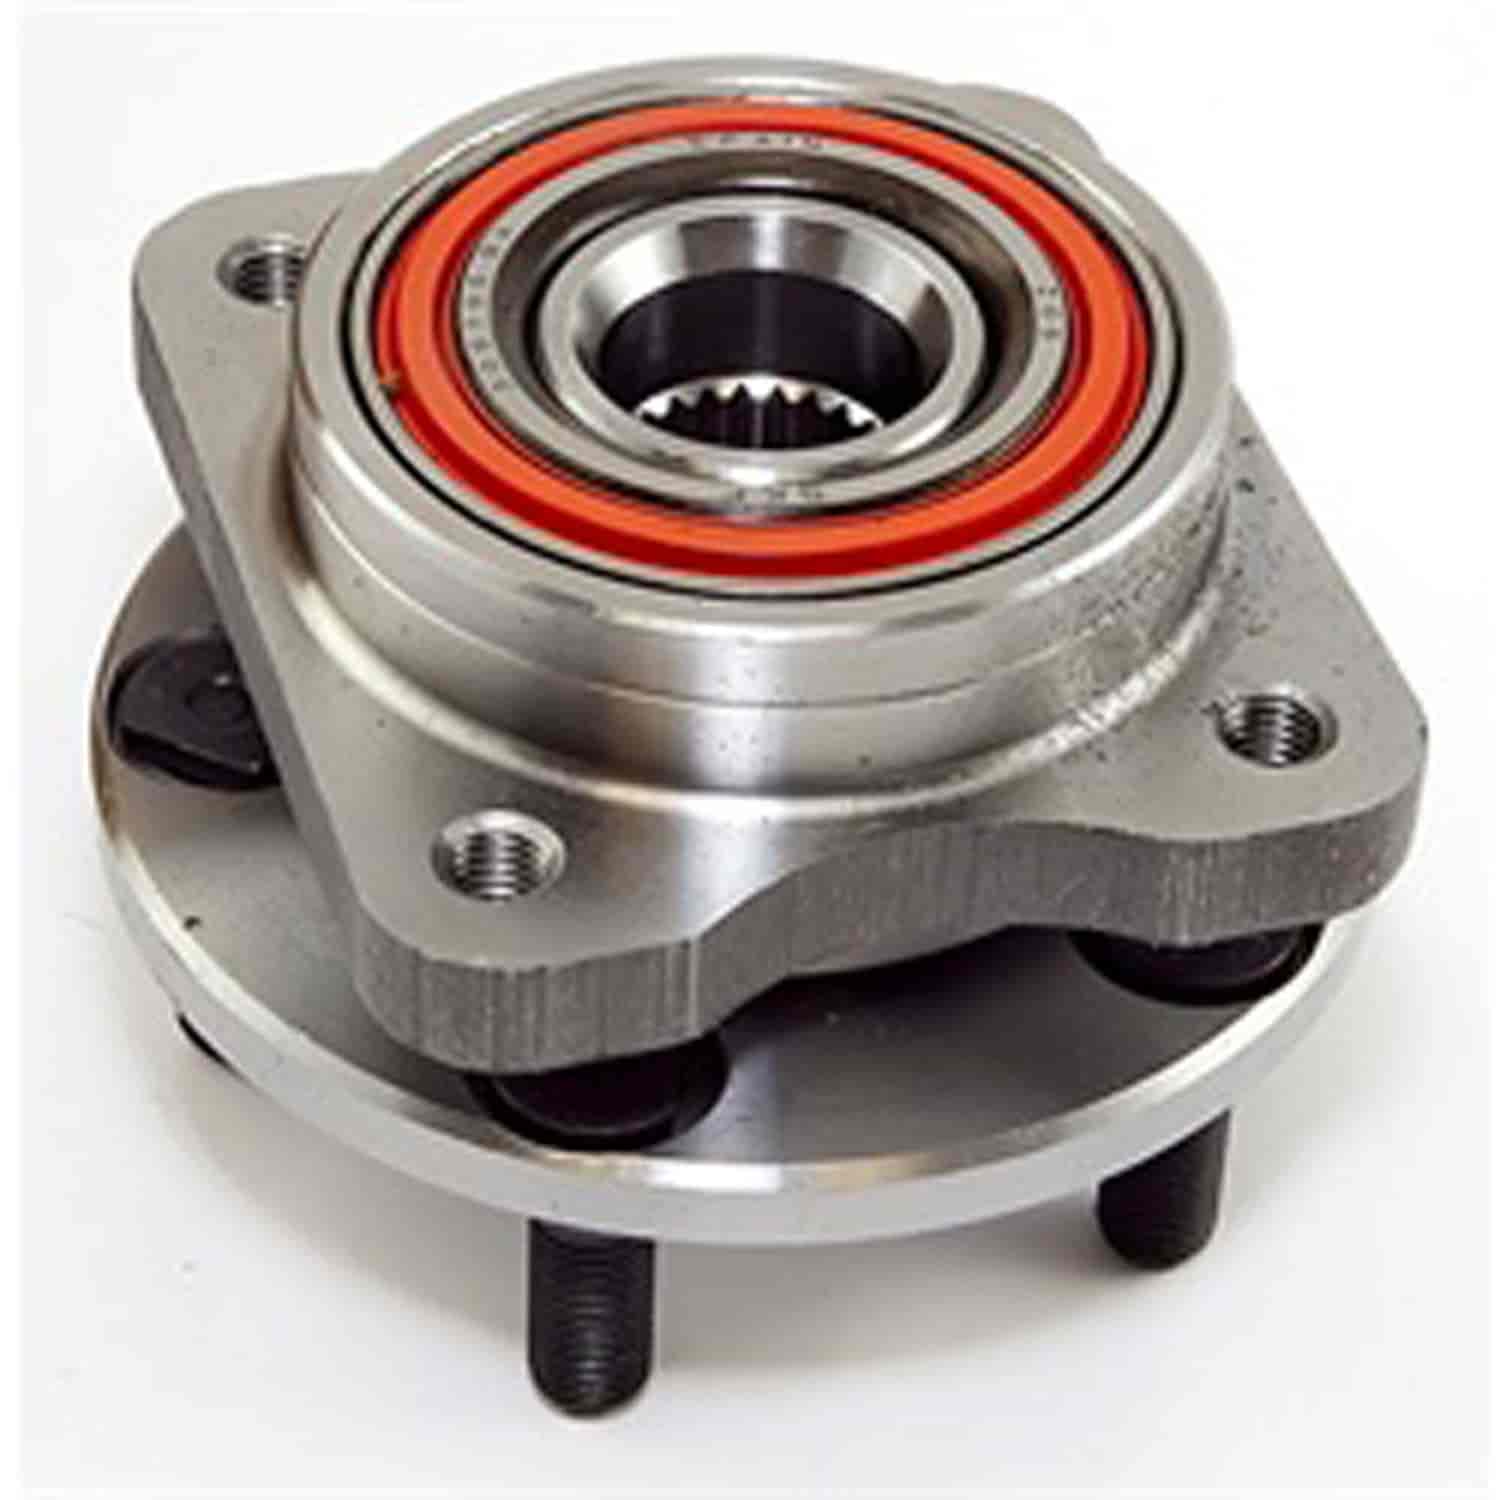 This front axle hub assembly from Omix-ADA fits 1995 Chrysler Lebarons.